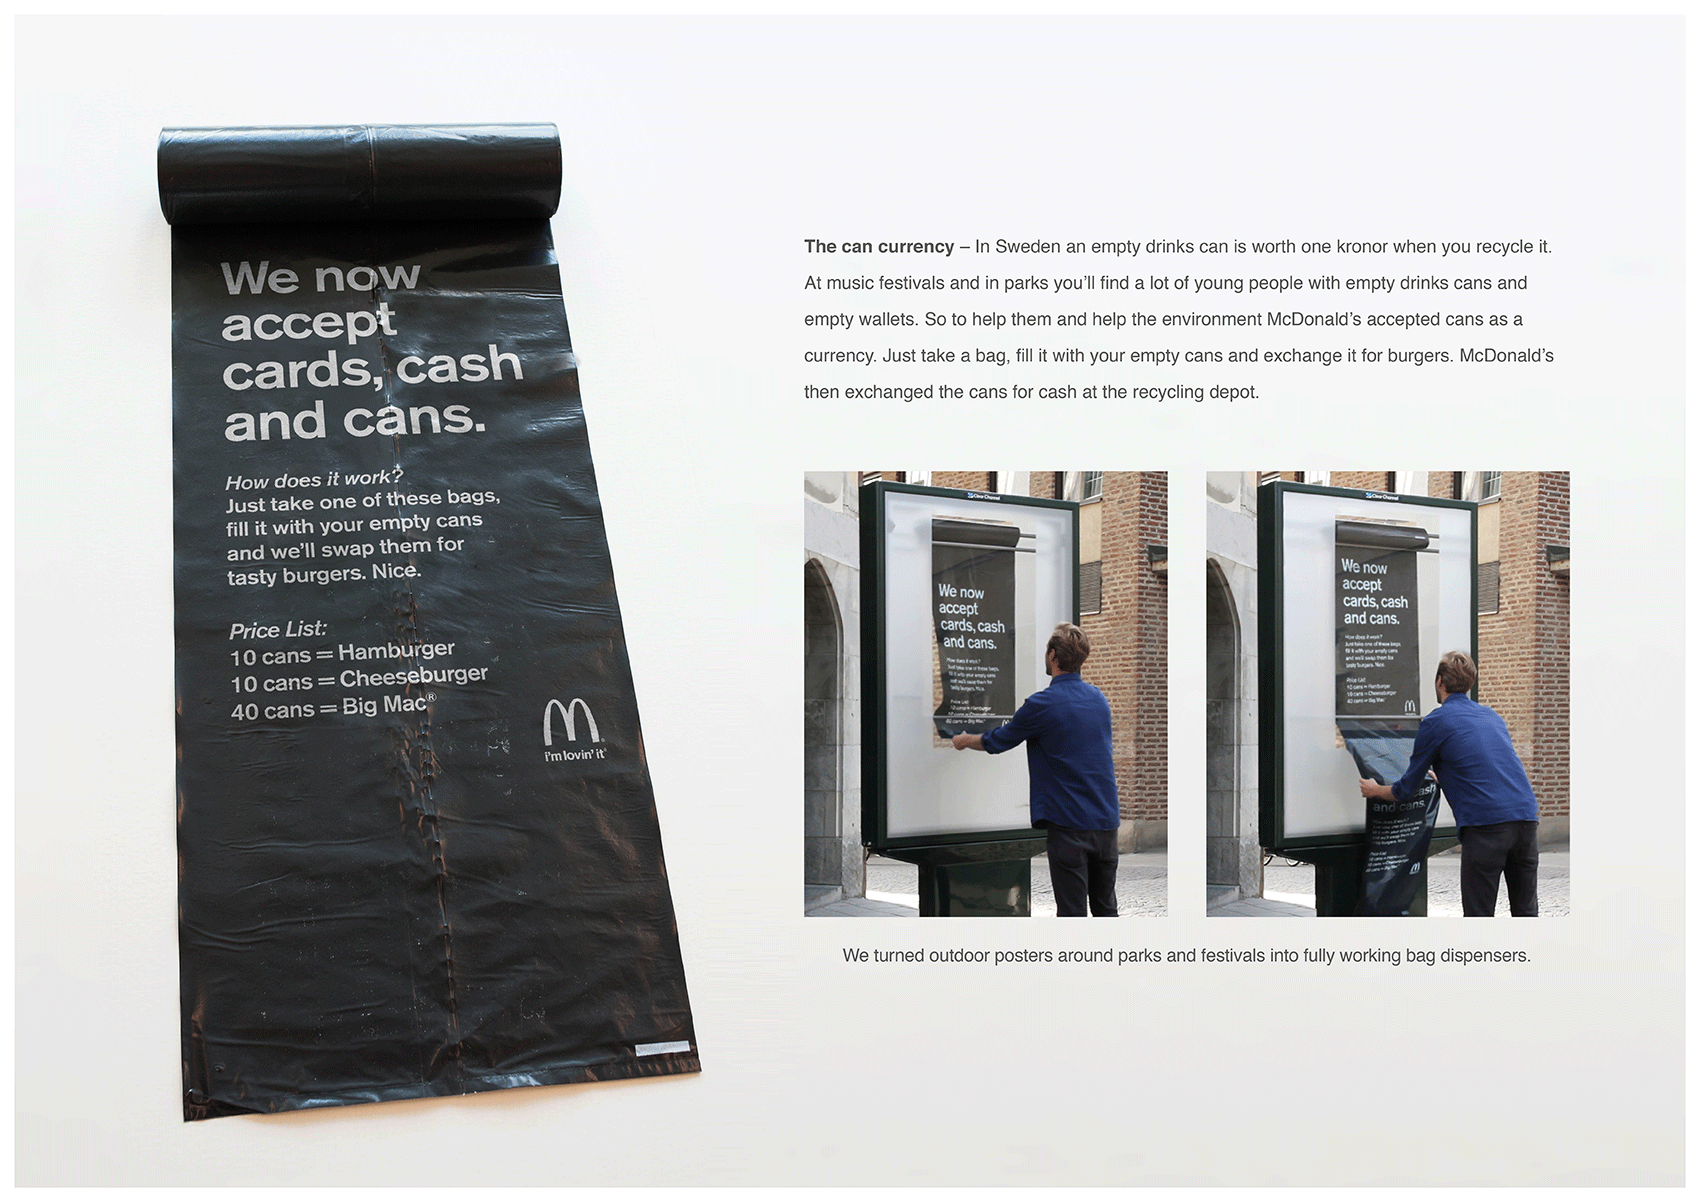 Would You Like To Be Able To Buy A Big Mac With Empty Soda & Beer Cans?